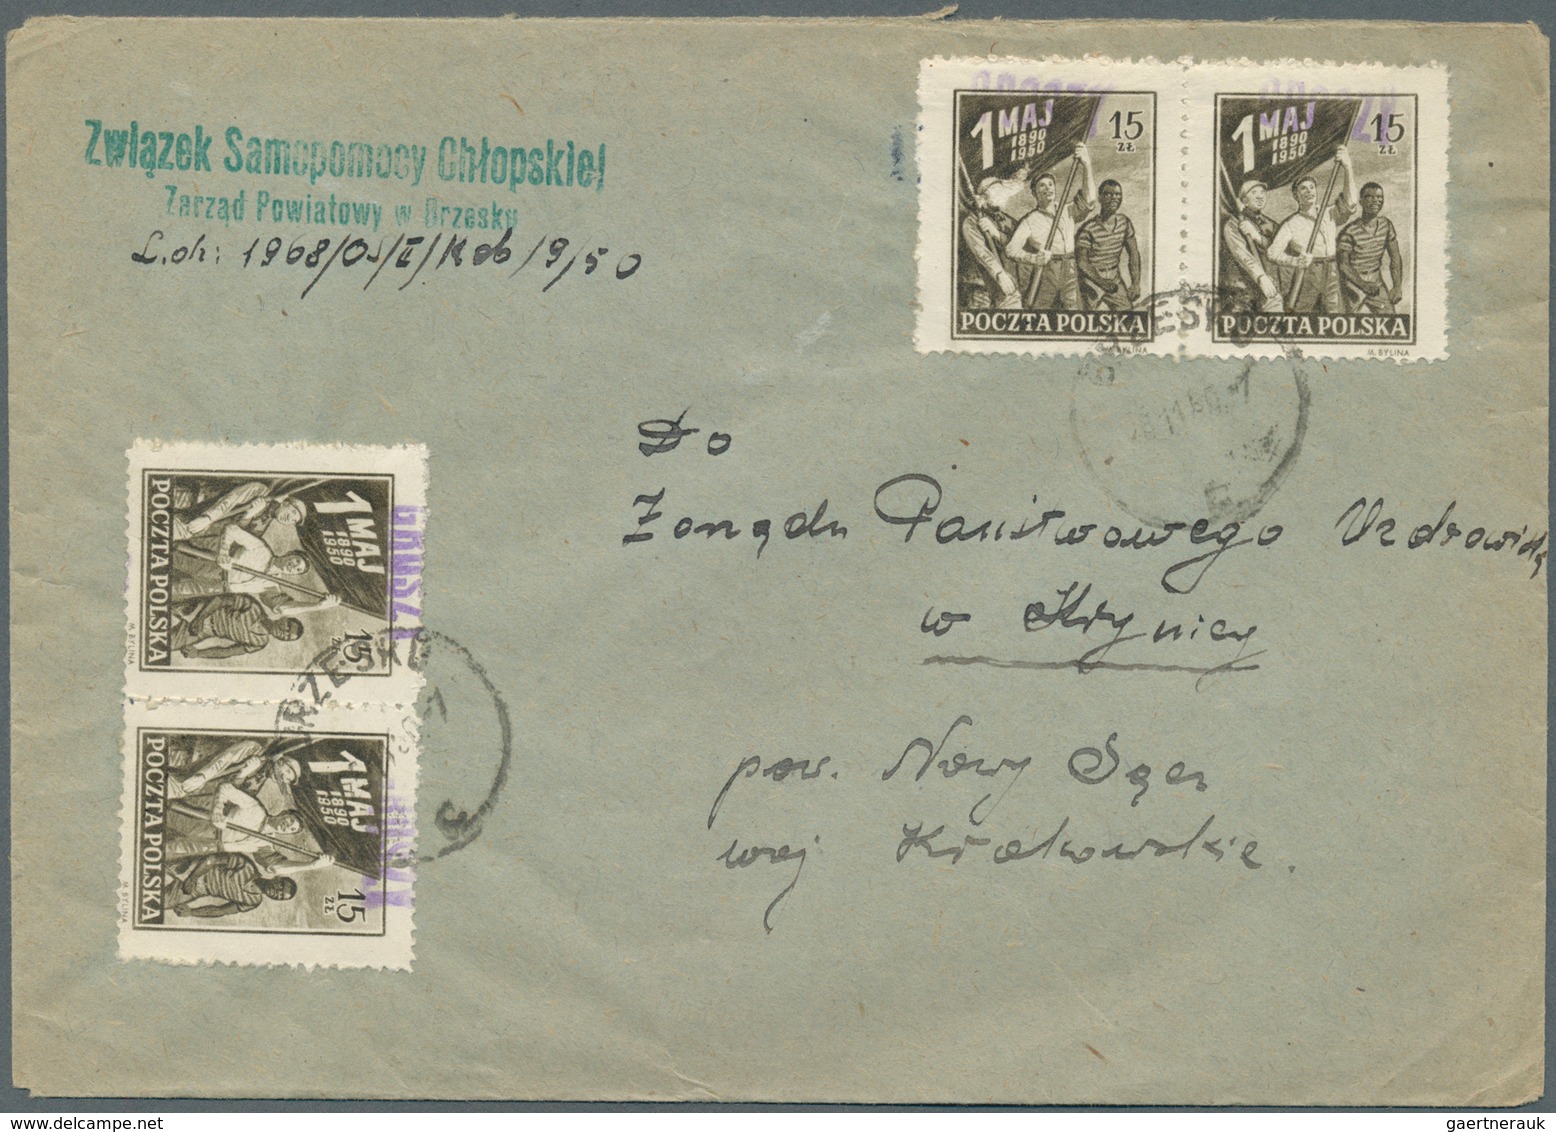 27726 Polen: 1950/1951, GROSZY OVERPRINTS: very comprehensive collection of more than 250 covers from the